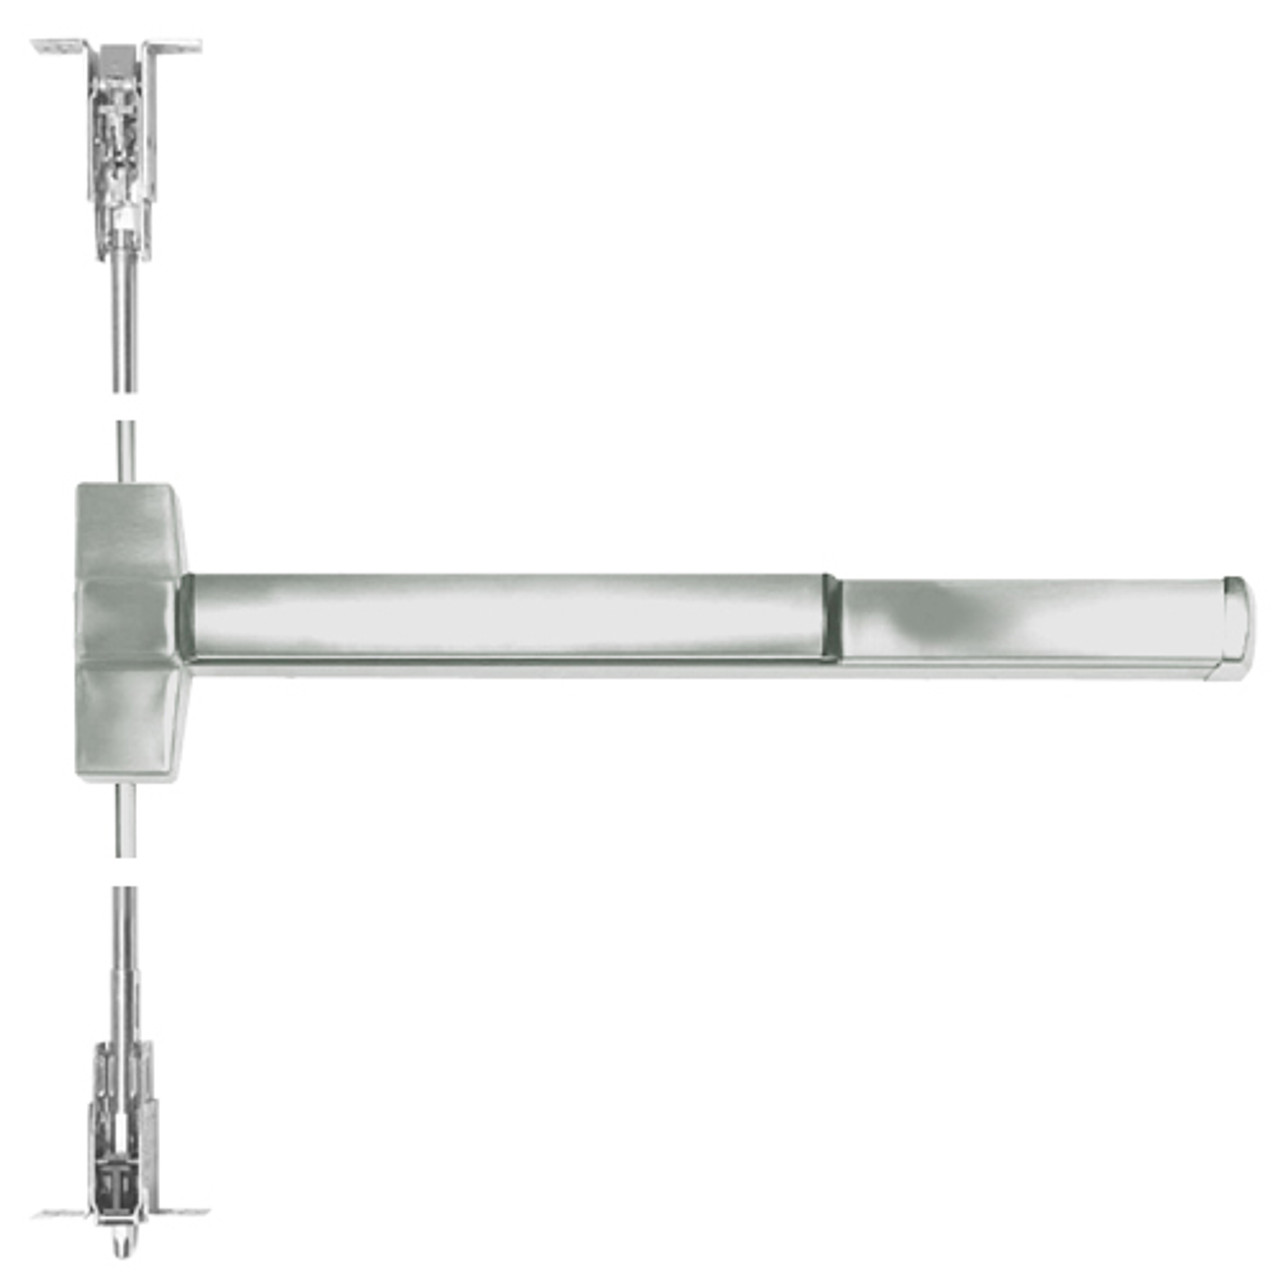 ED5860B-619-MELR Corbin ED5800 Series Fire Rated Concealed Vertical Rod Device with Motor Latch Retraction in Satin Nickel Finish